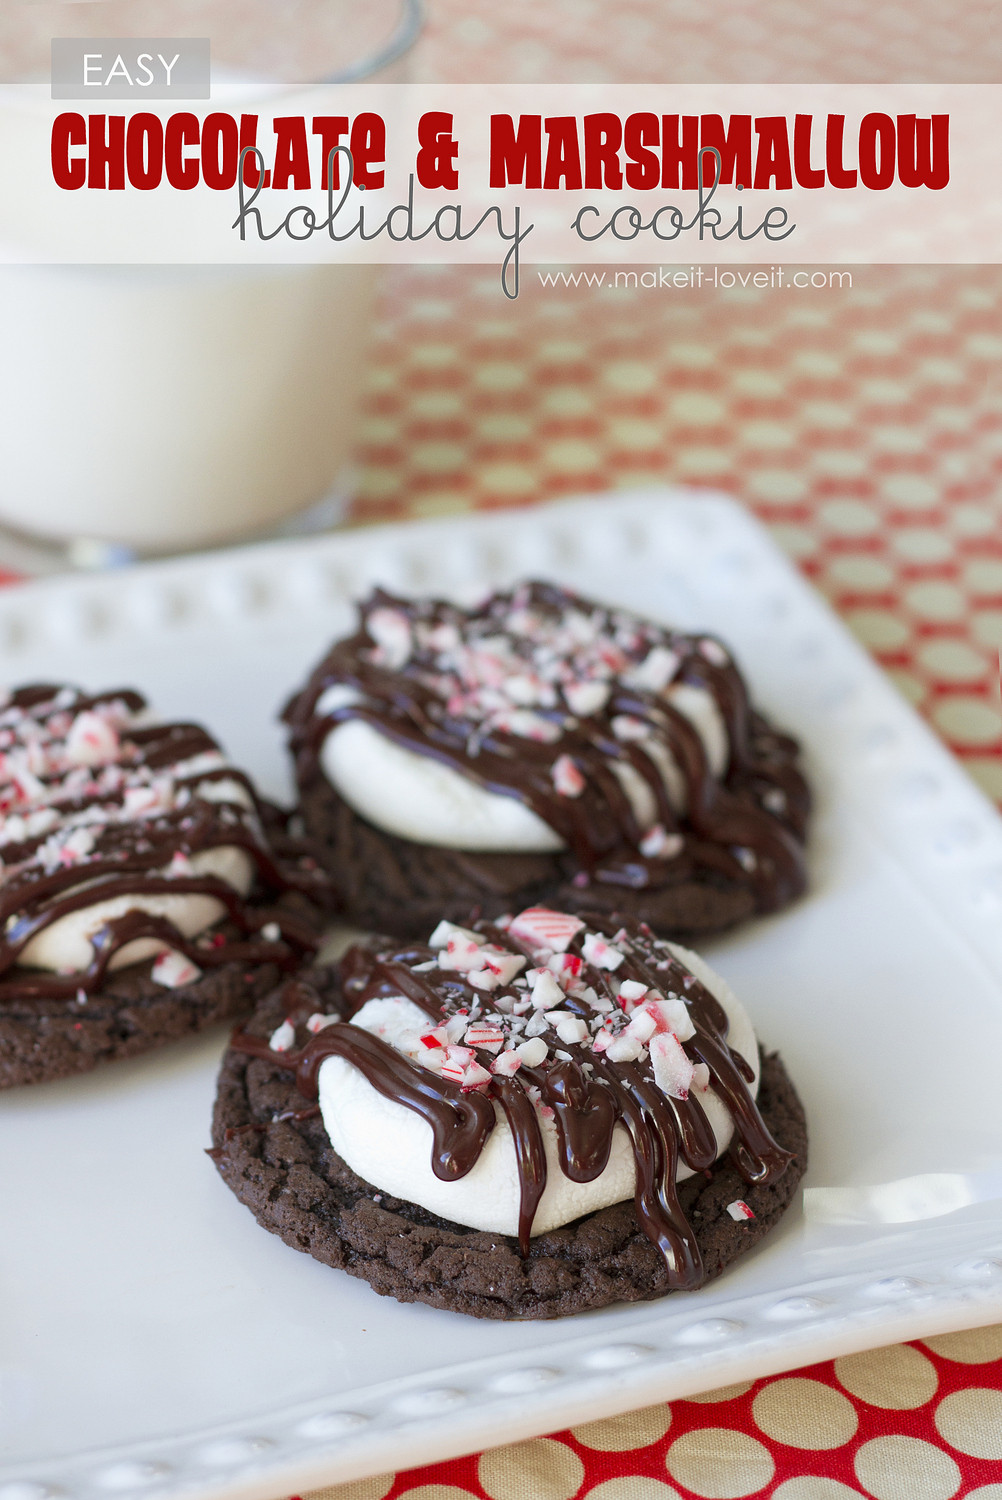 Quick And Easy Christmas Cookies
 EASY Chocolate & Marshmallow Holiday Cookie plus a